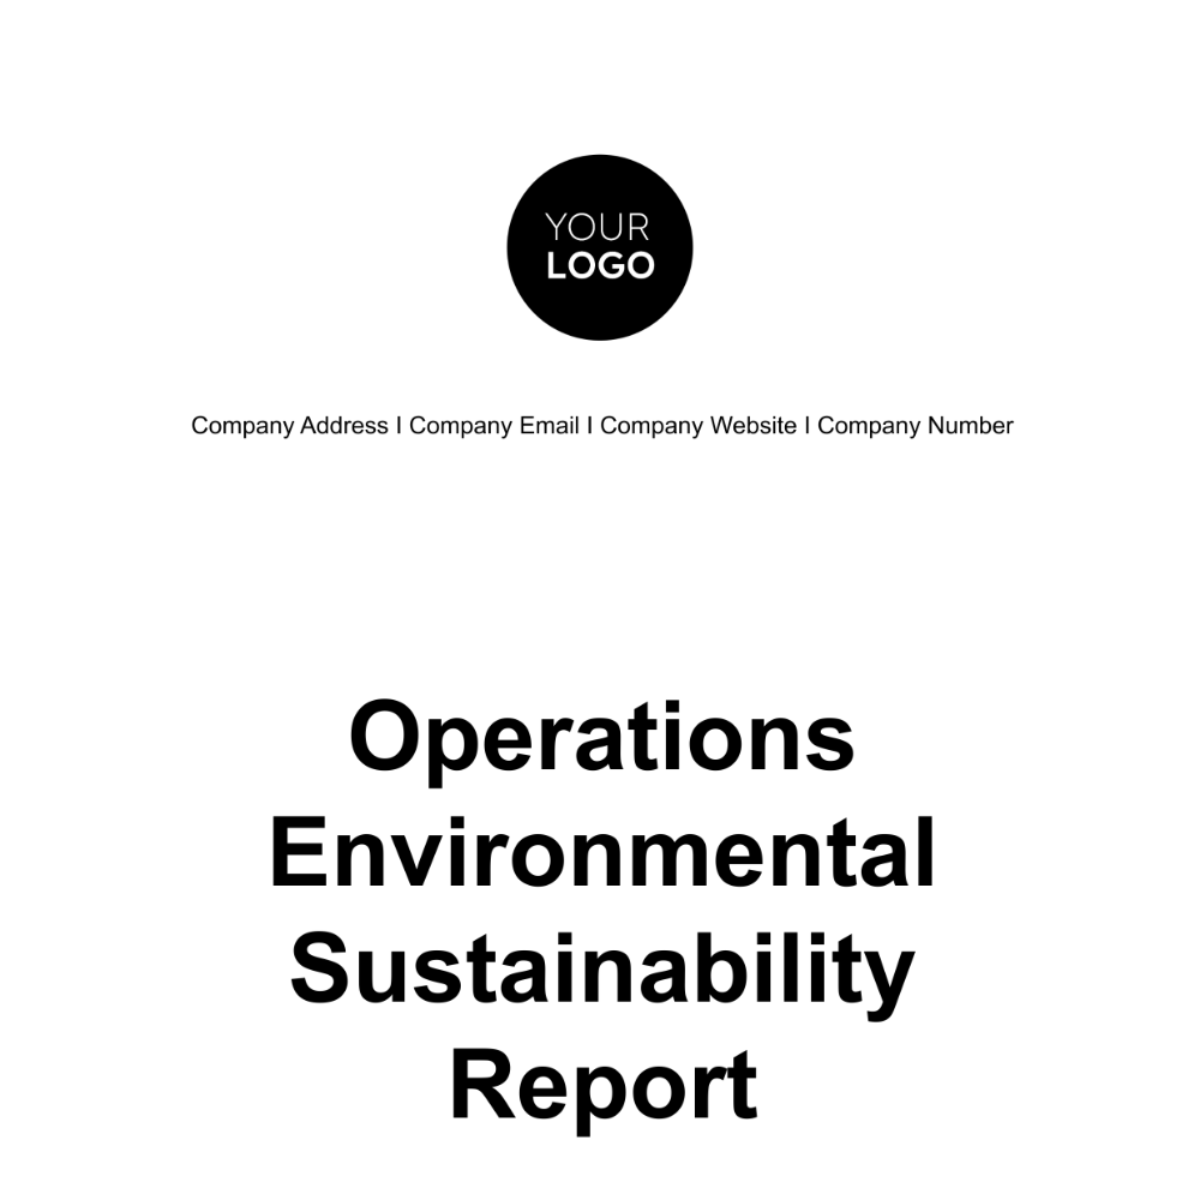 Operations Environmental Sustainability Report Template